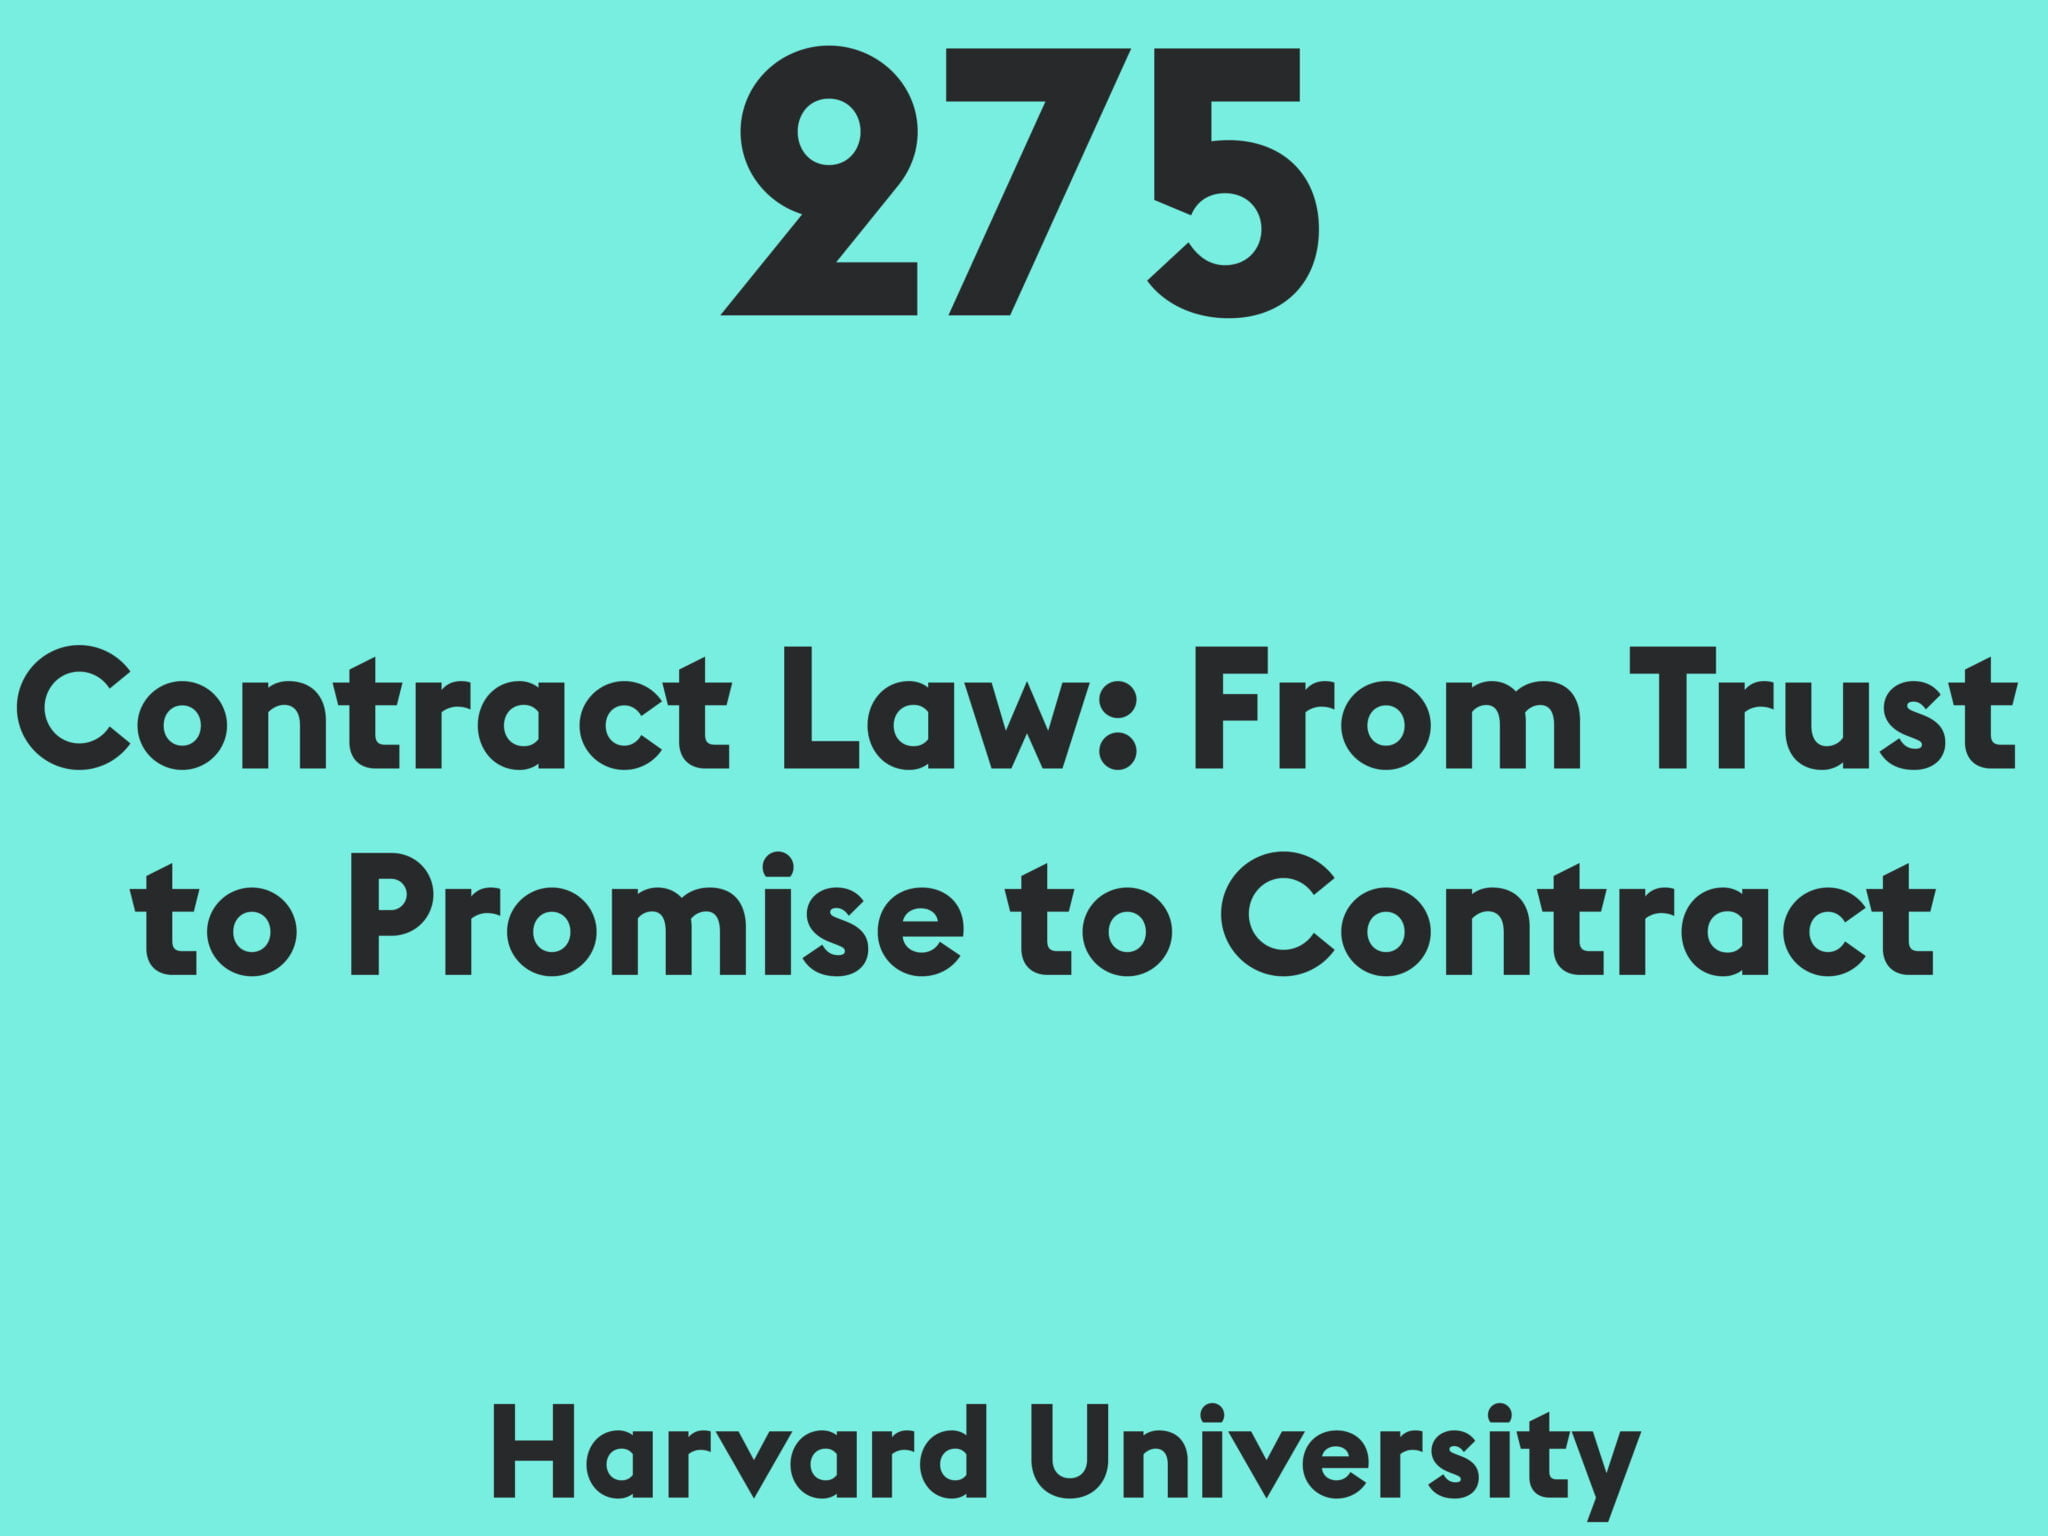 Contract Law: From Trust to Promise to Contract